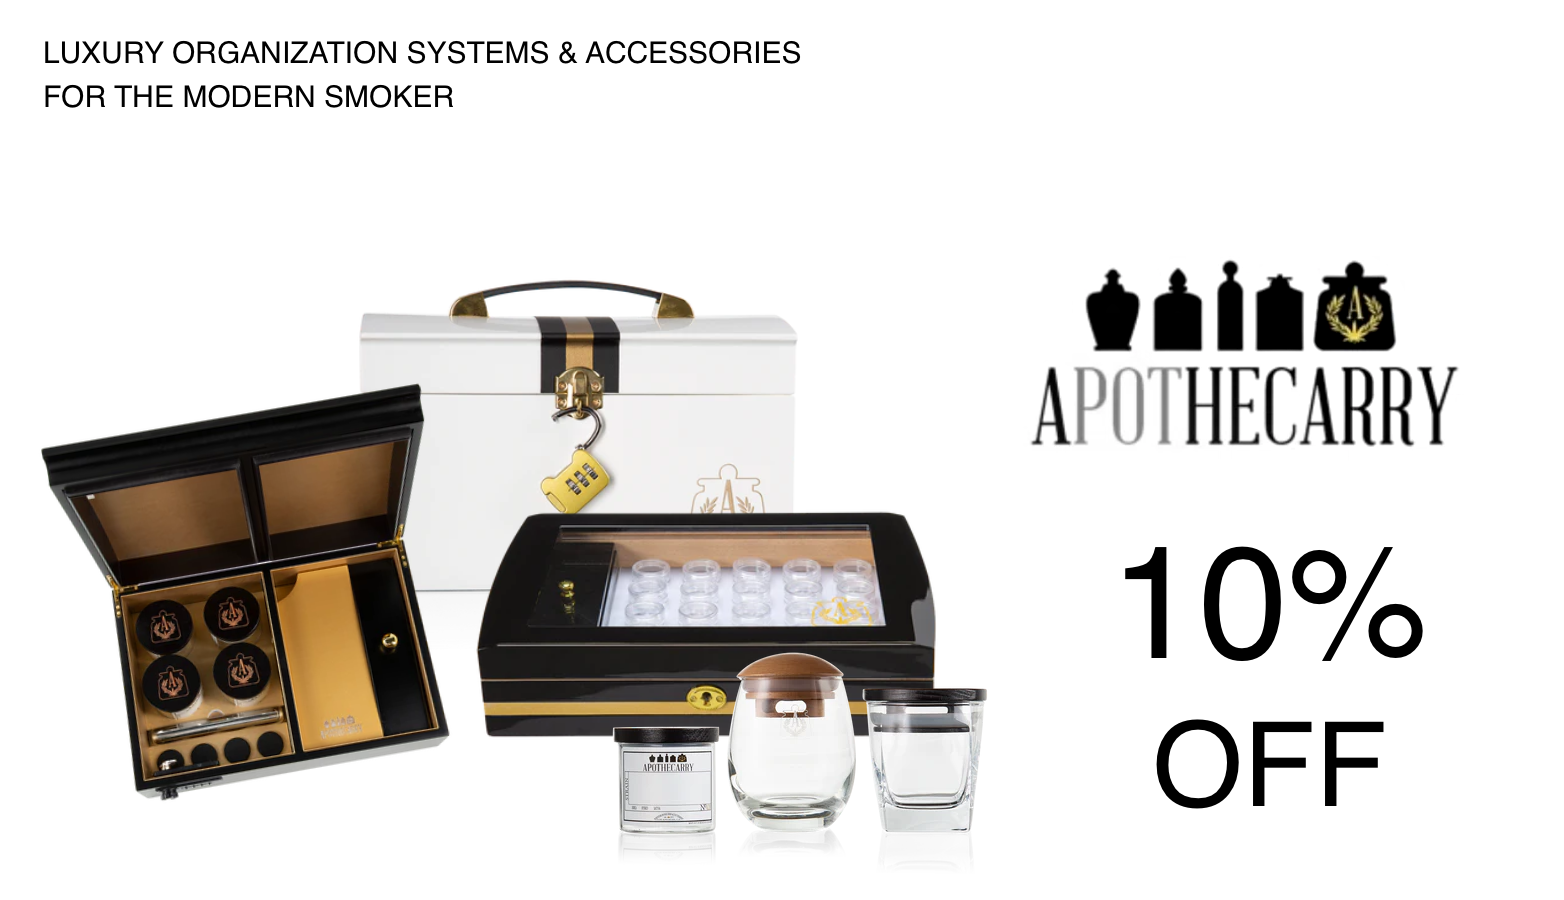 Apothecarry Case Discount Code - Save On Cannabis Verified